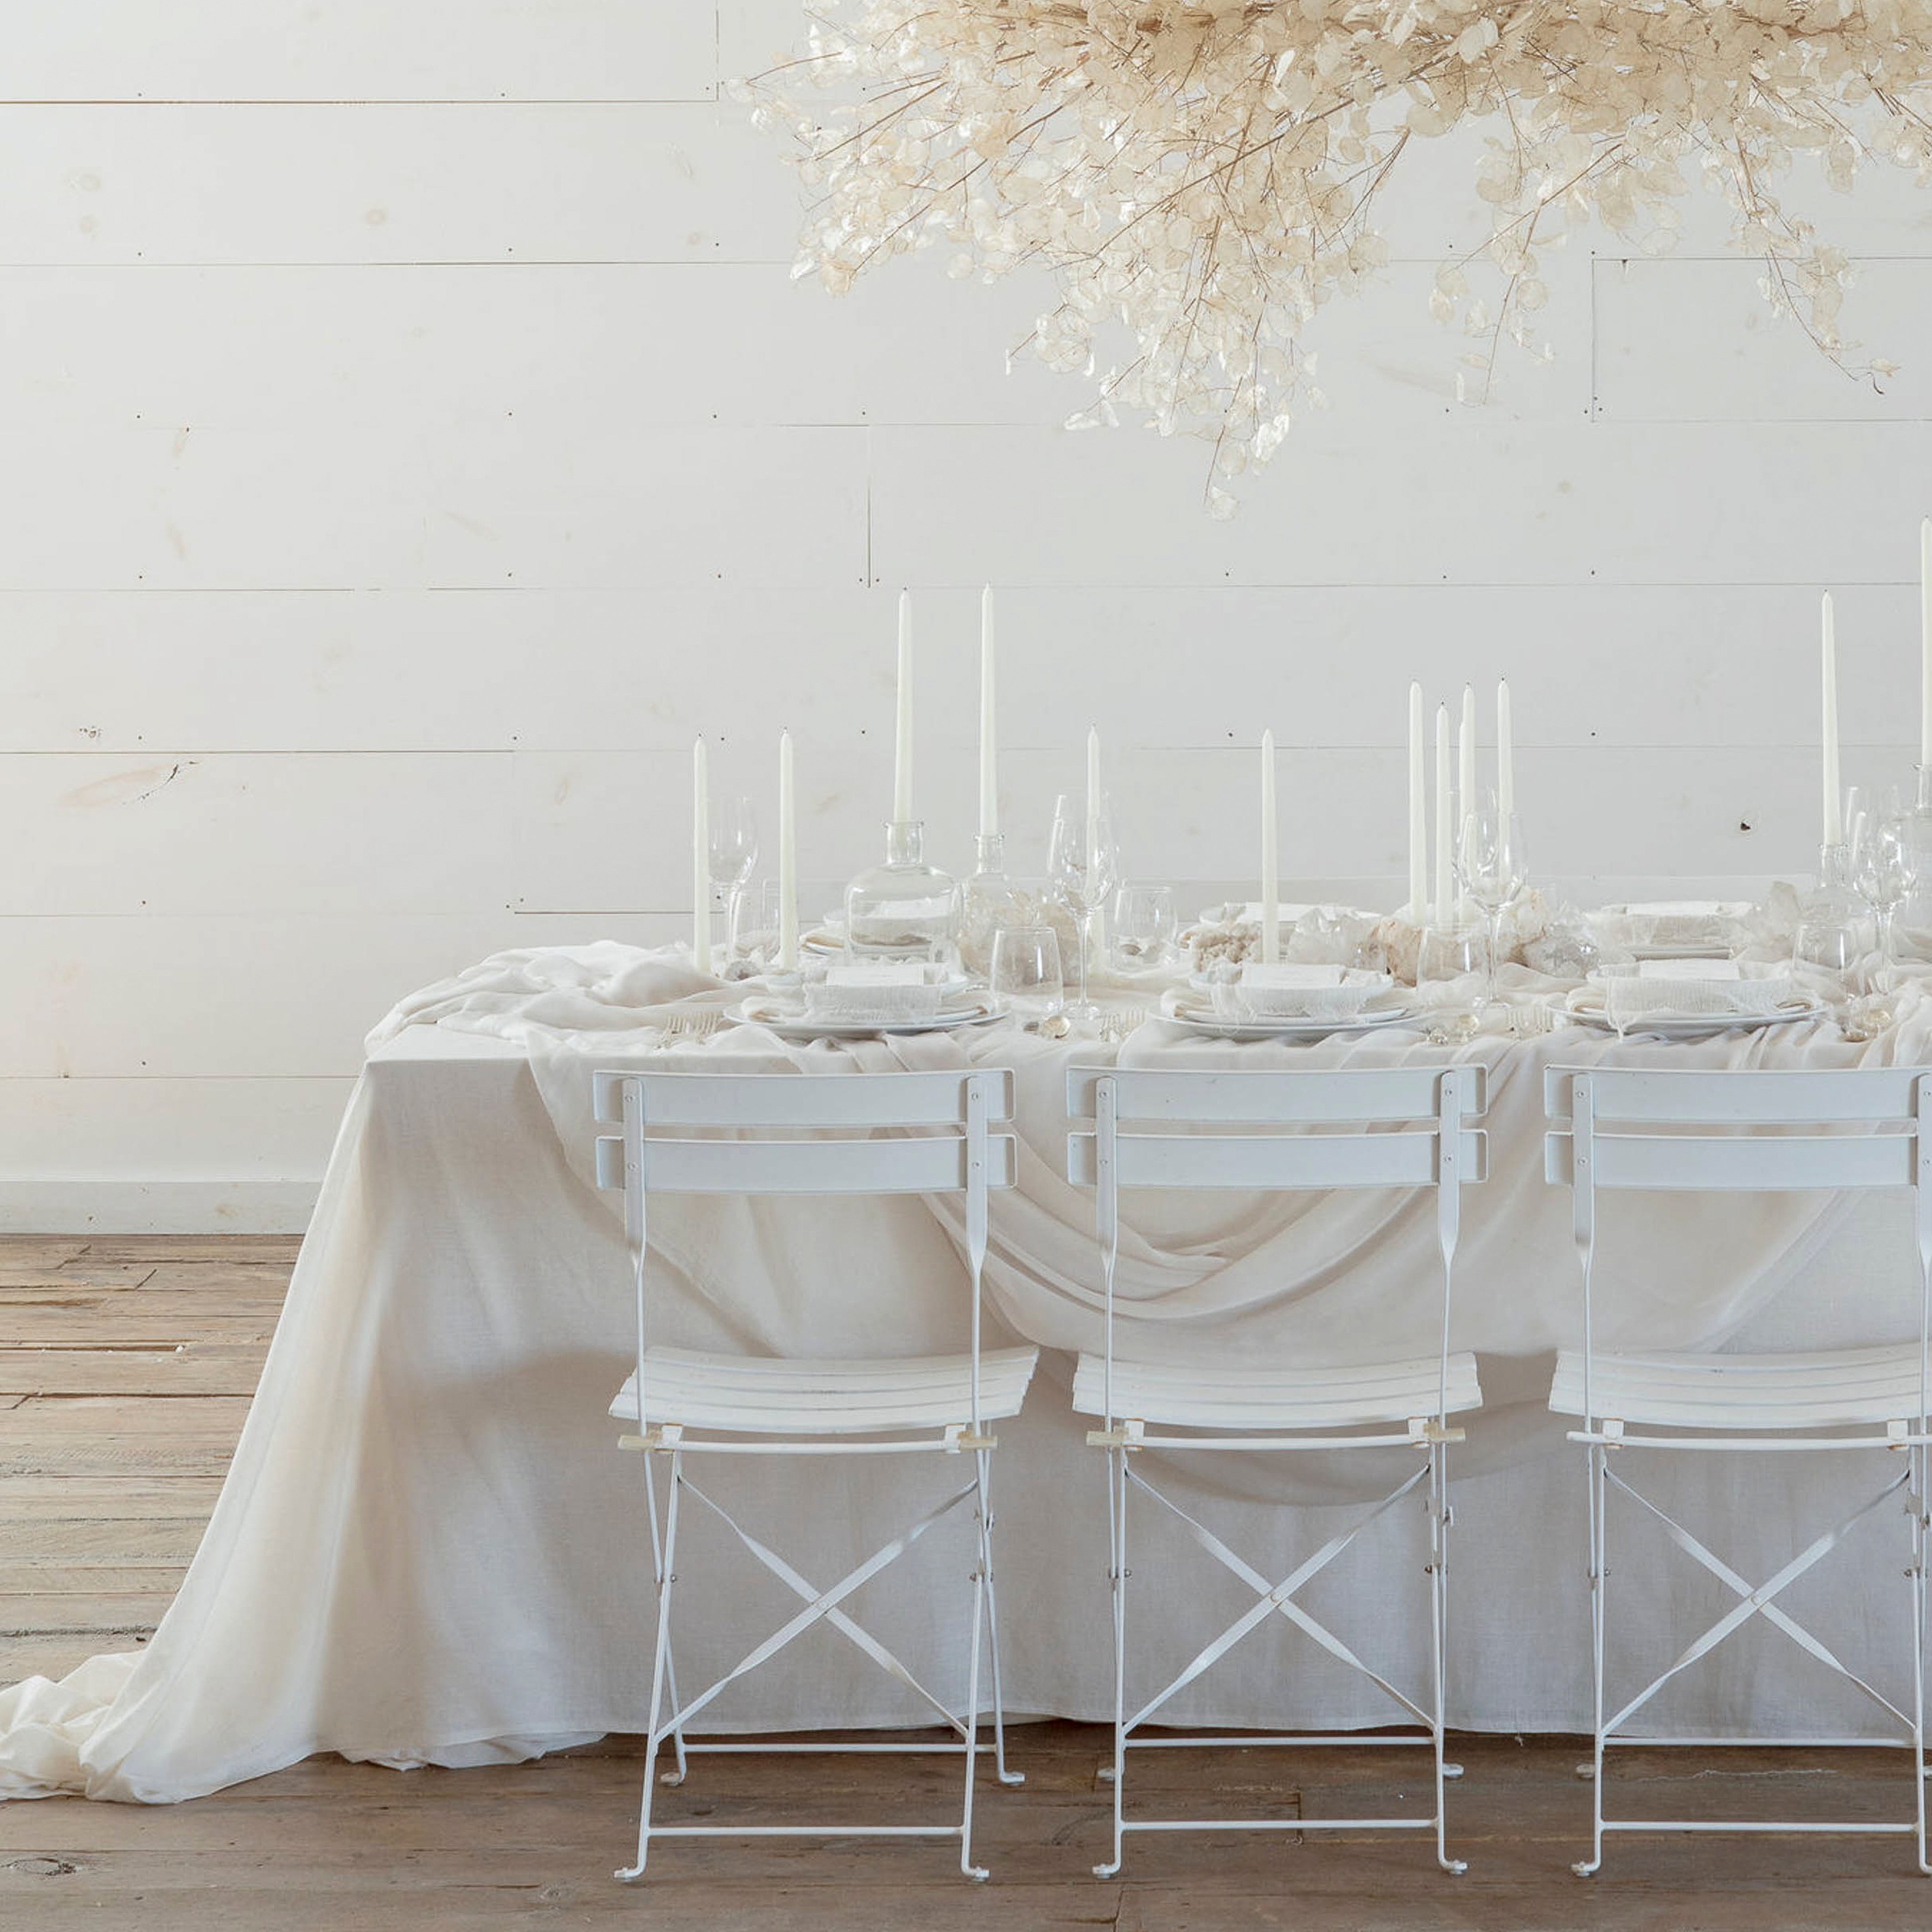 wedding table setting with monochromatic white table decor